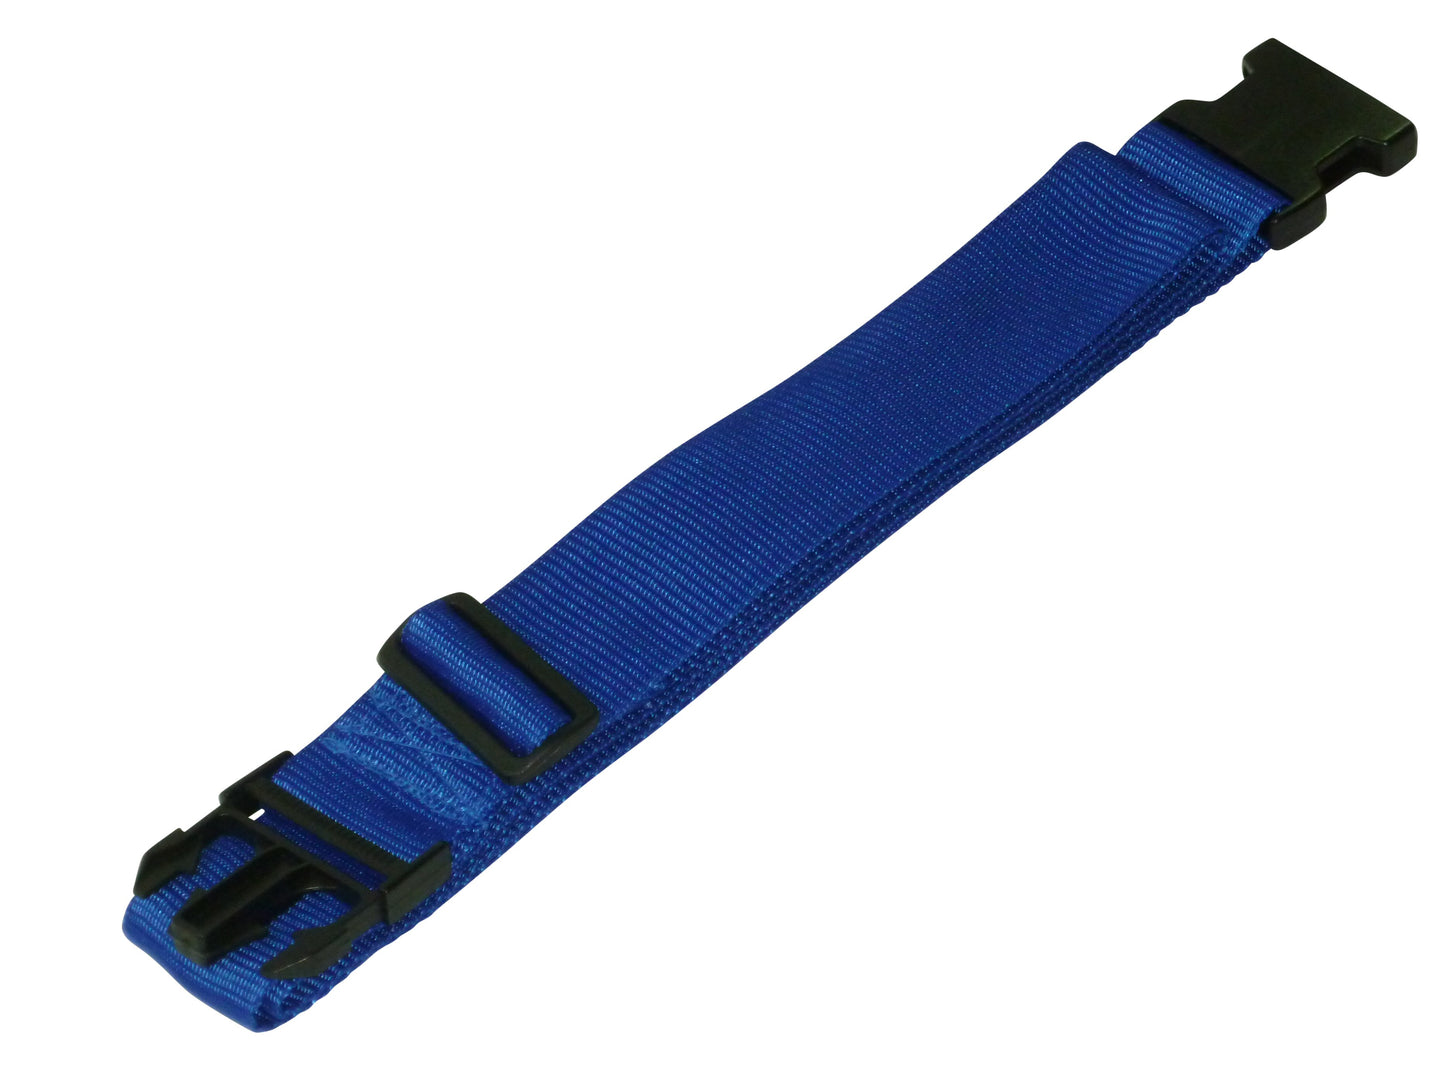 Benristraps 50mm Webbing Strap with Quick Release & Length-Adjusting Buckles in blue